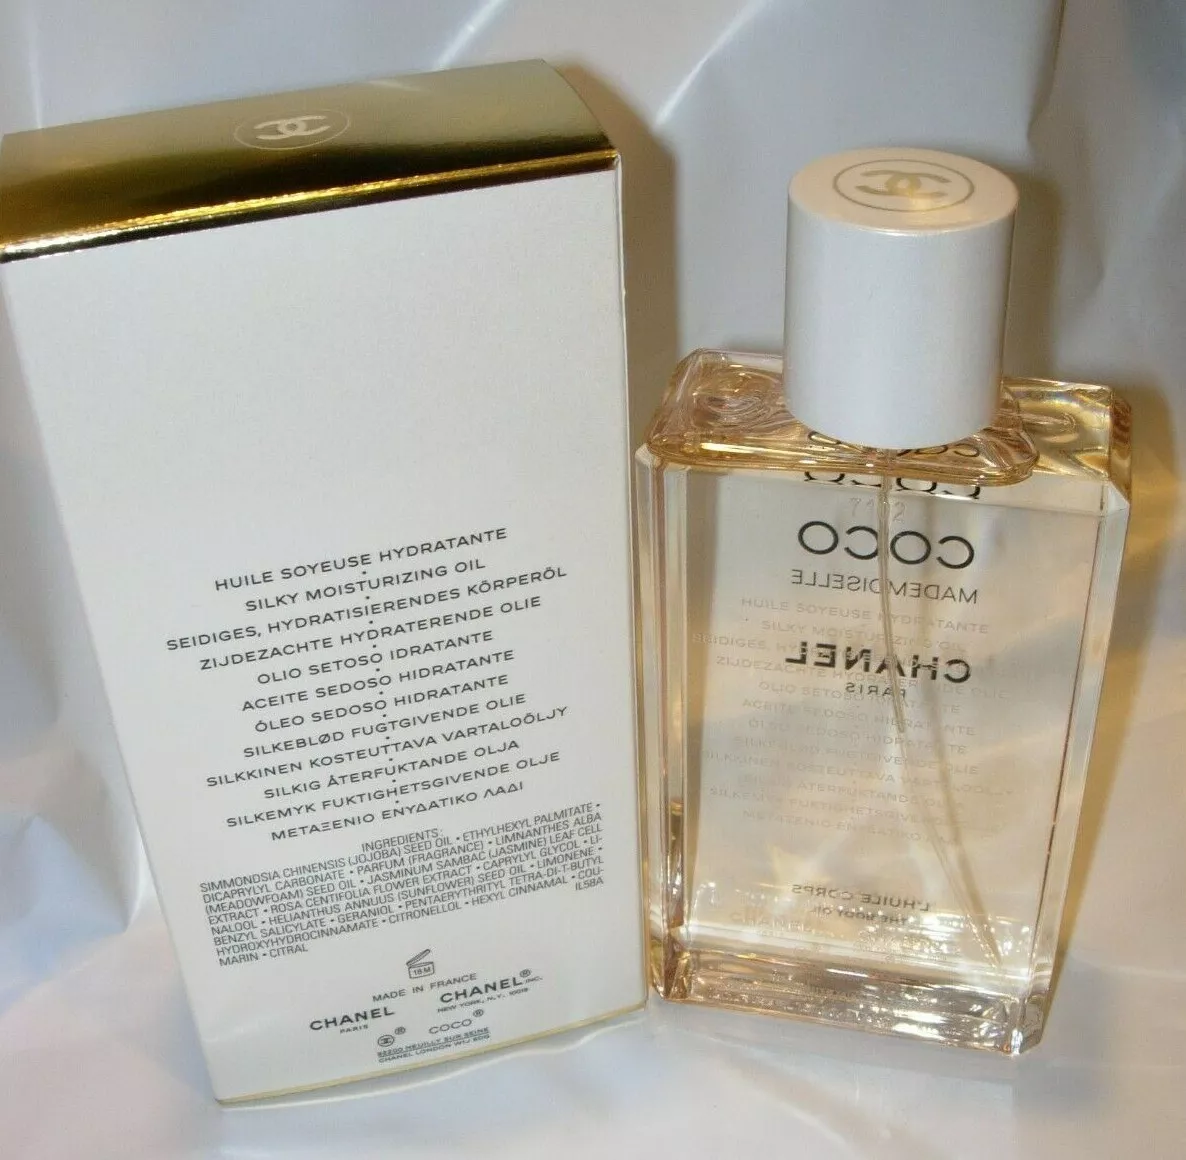 WOMENS NEW Chanel Coco Mademoiselle THE Body Oil 200 ml 6.8 Oz